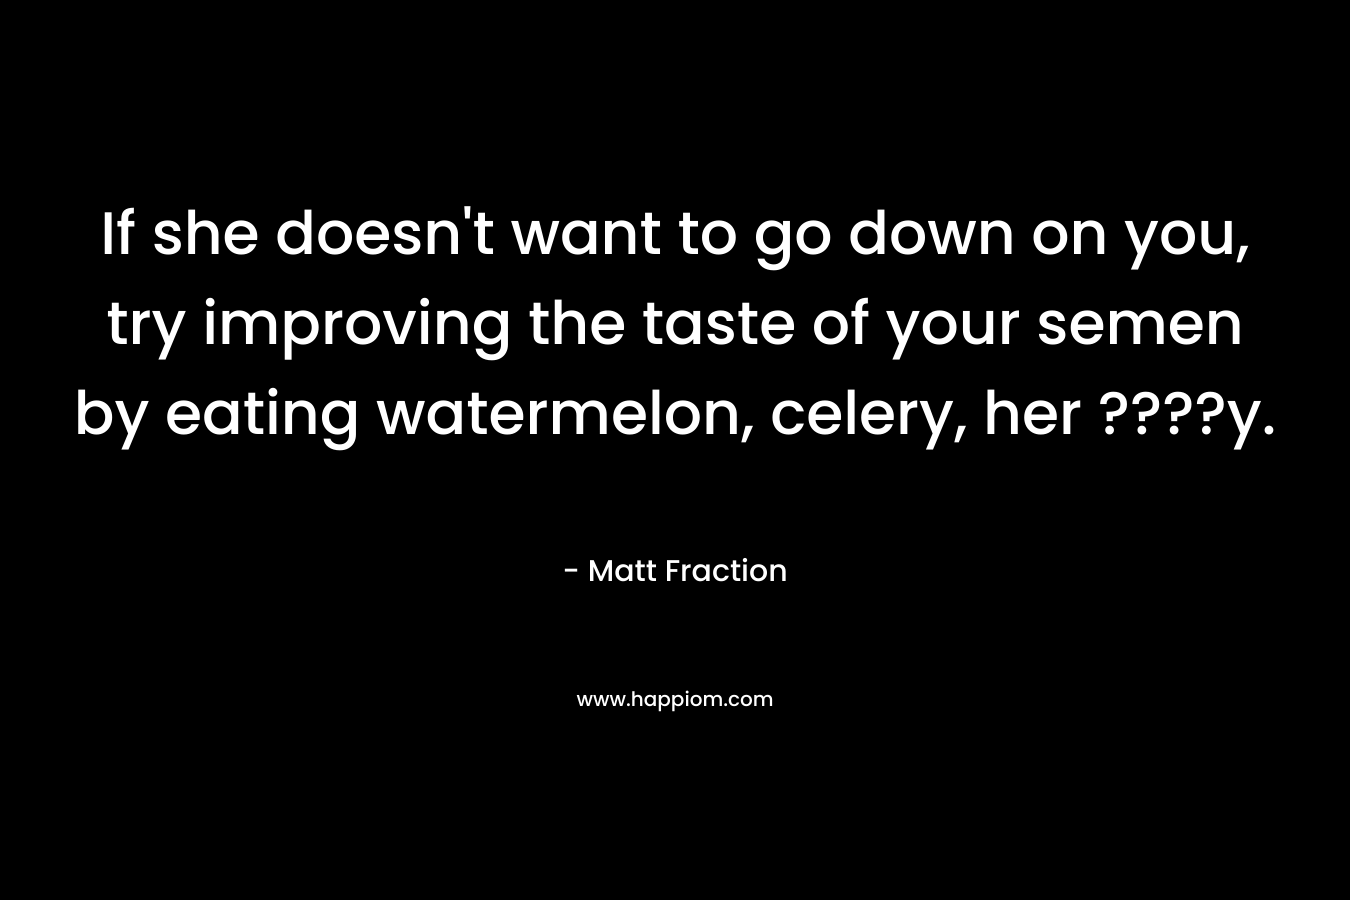 If she doesn't want to go down on you, try improving the taste of your semen by eating watermelon, celery, her ????y.